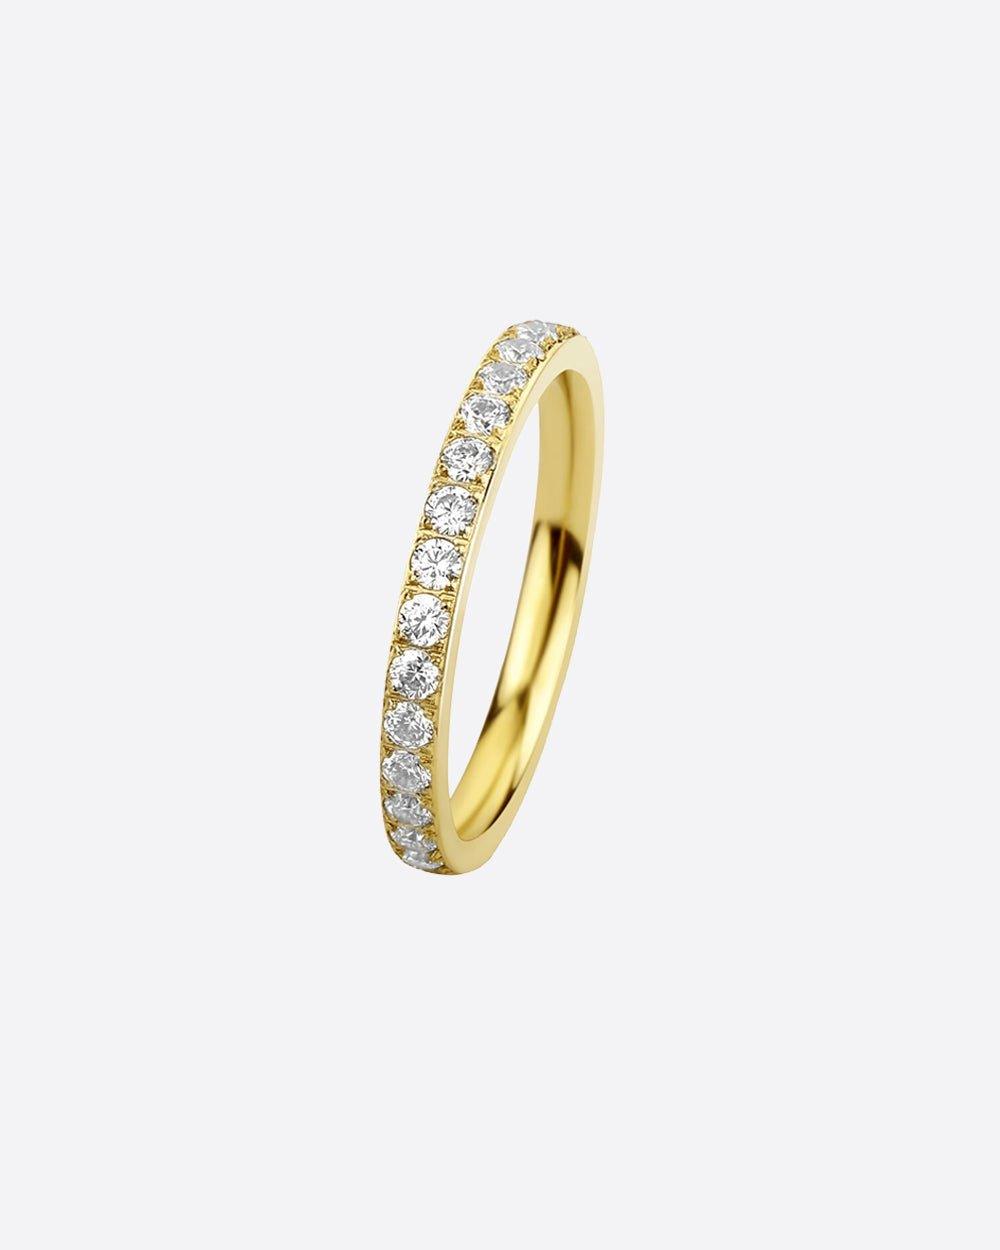 DAZZLE RING RING. - 18K GOLD - DRIP IN THE JEWEL